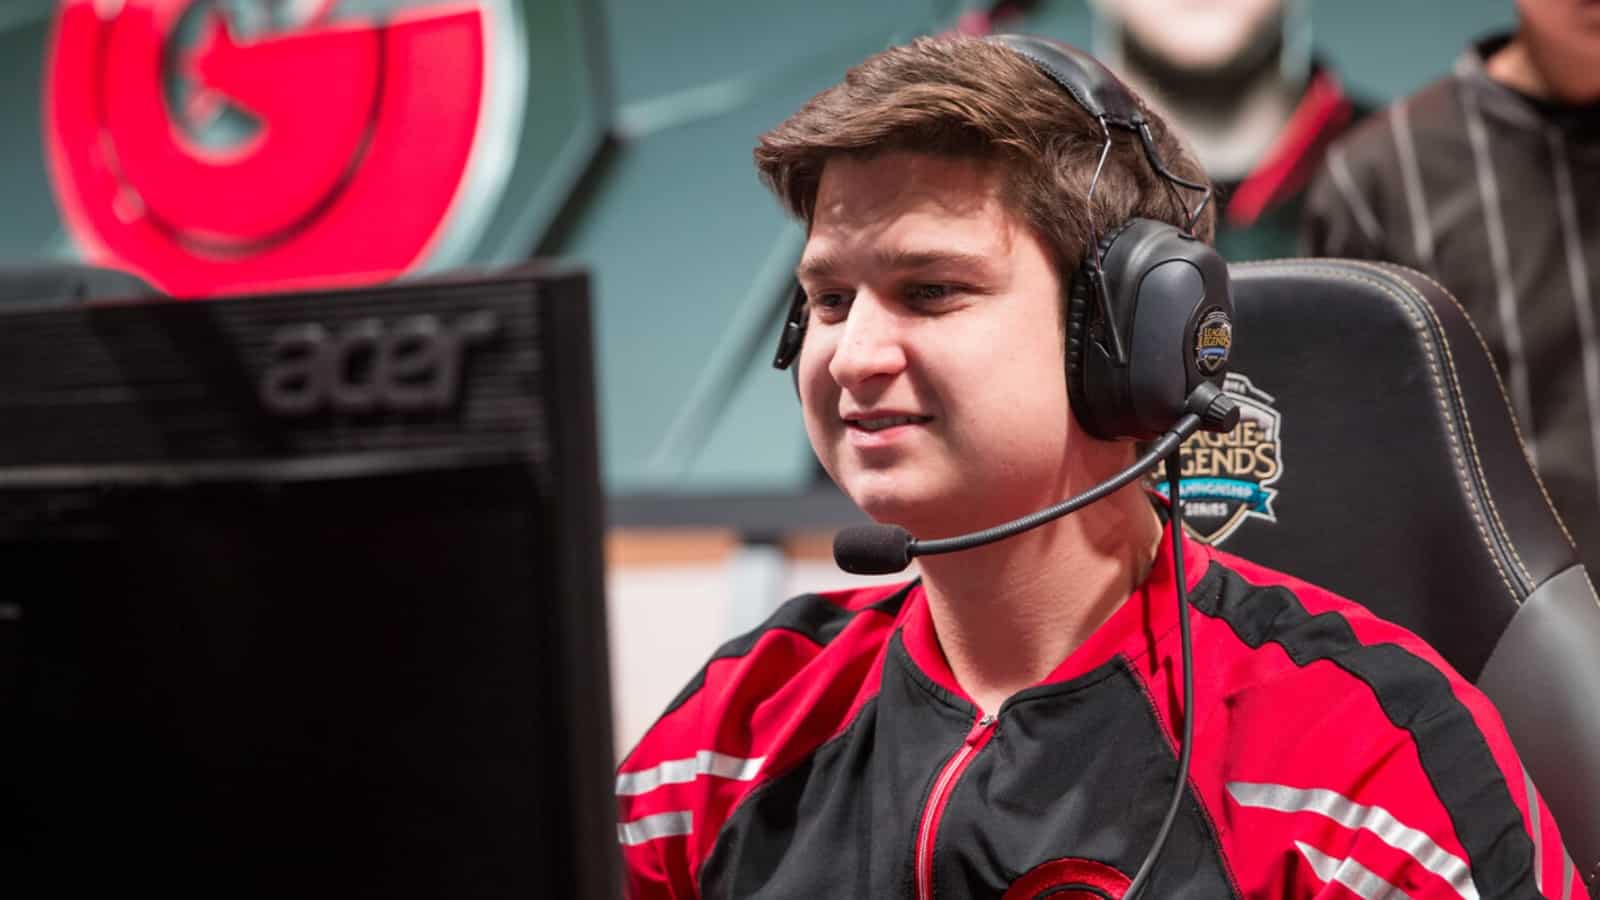 League veteran Febiven keen to extend pro career: "My time is not over"